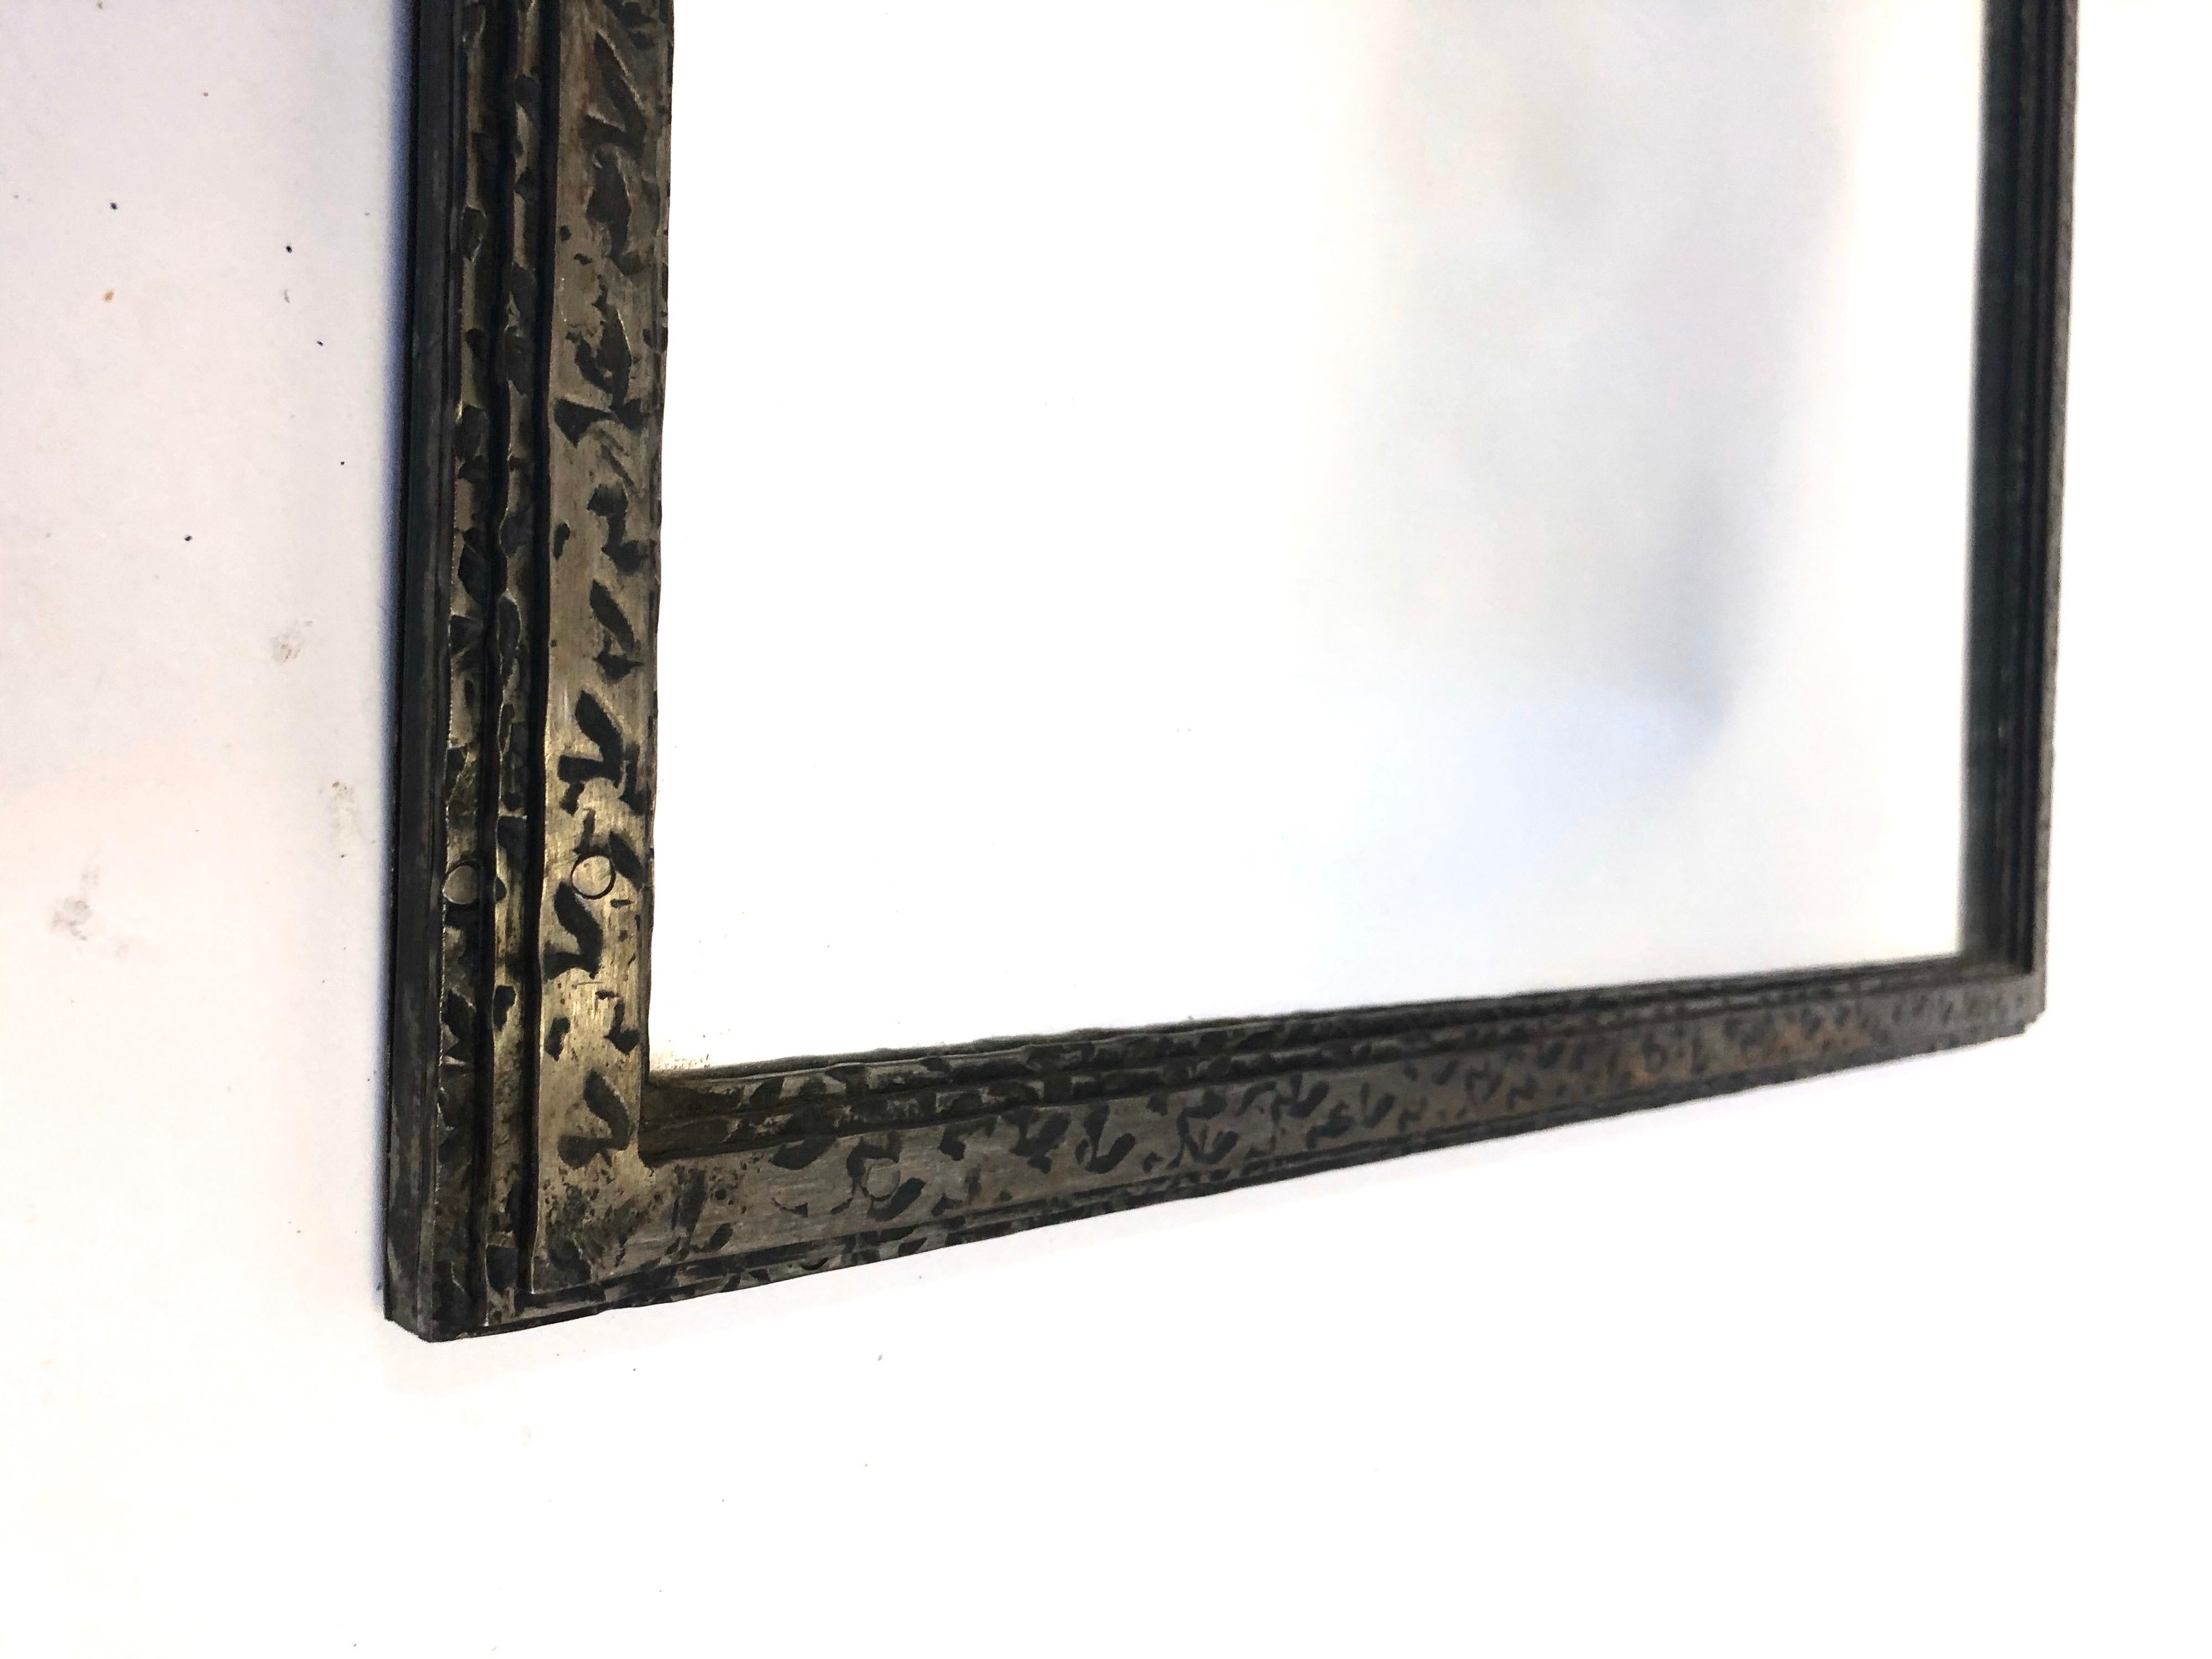 Art Deco Early Modern / Cubist Hammered Wrought Iron Mirror Attributed to Edgar Brandt For Sale